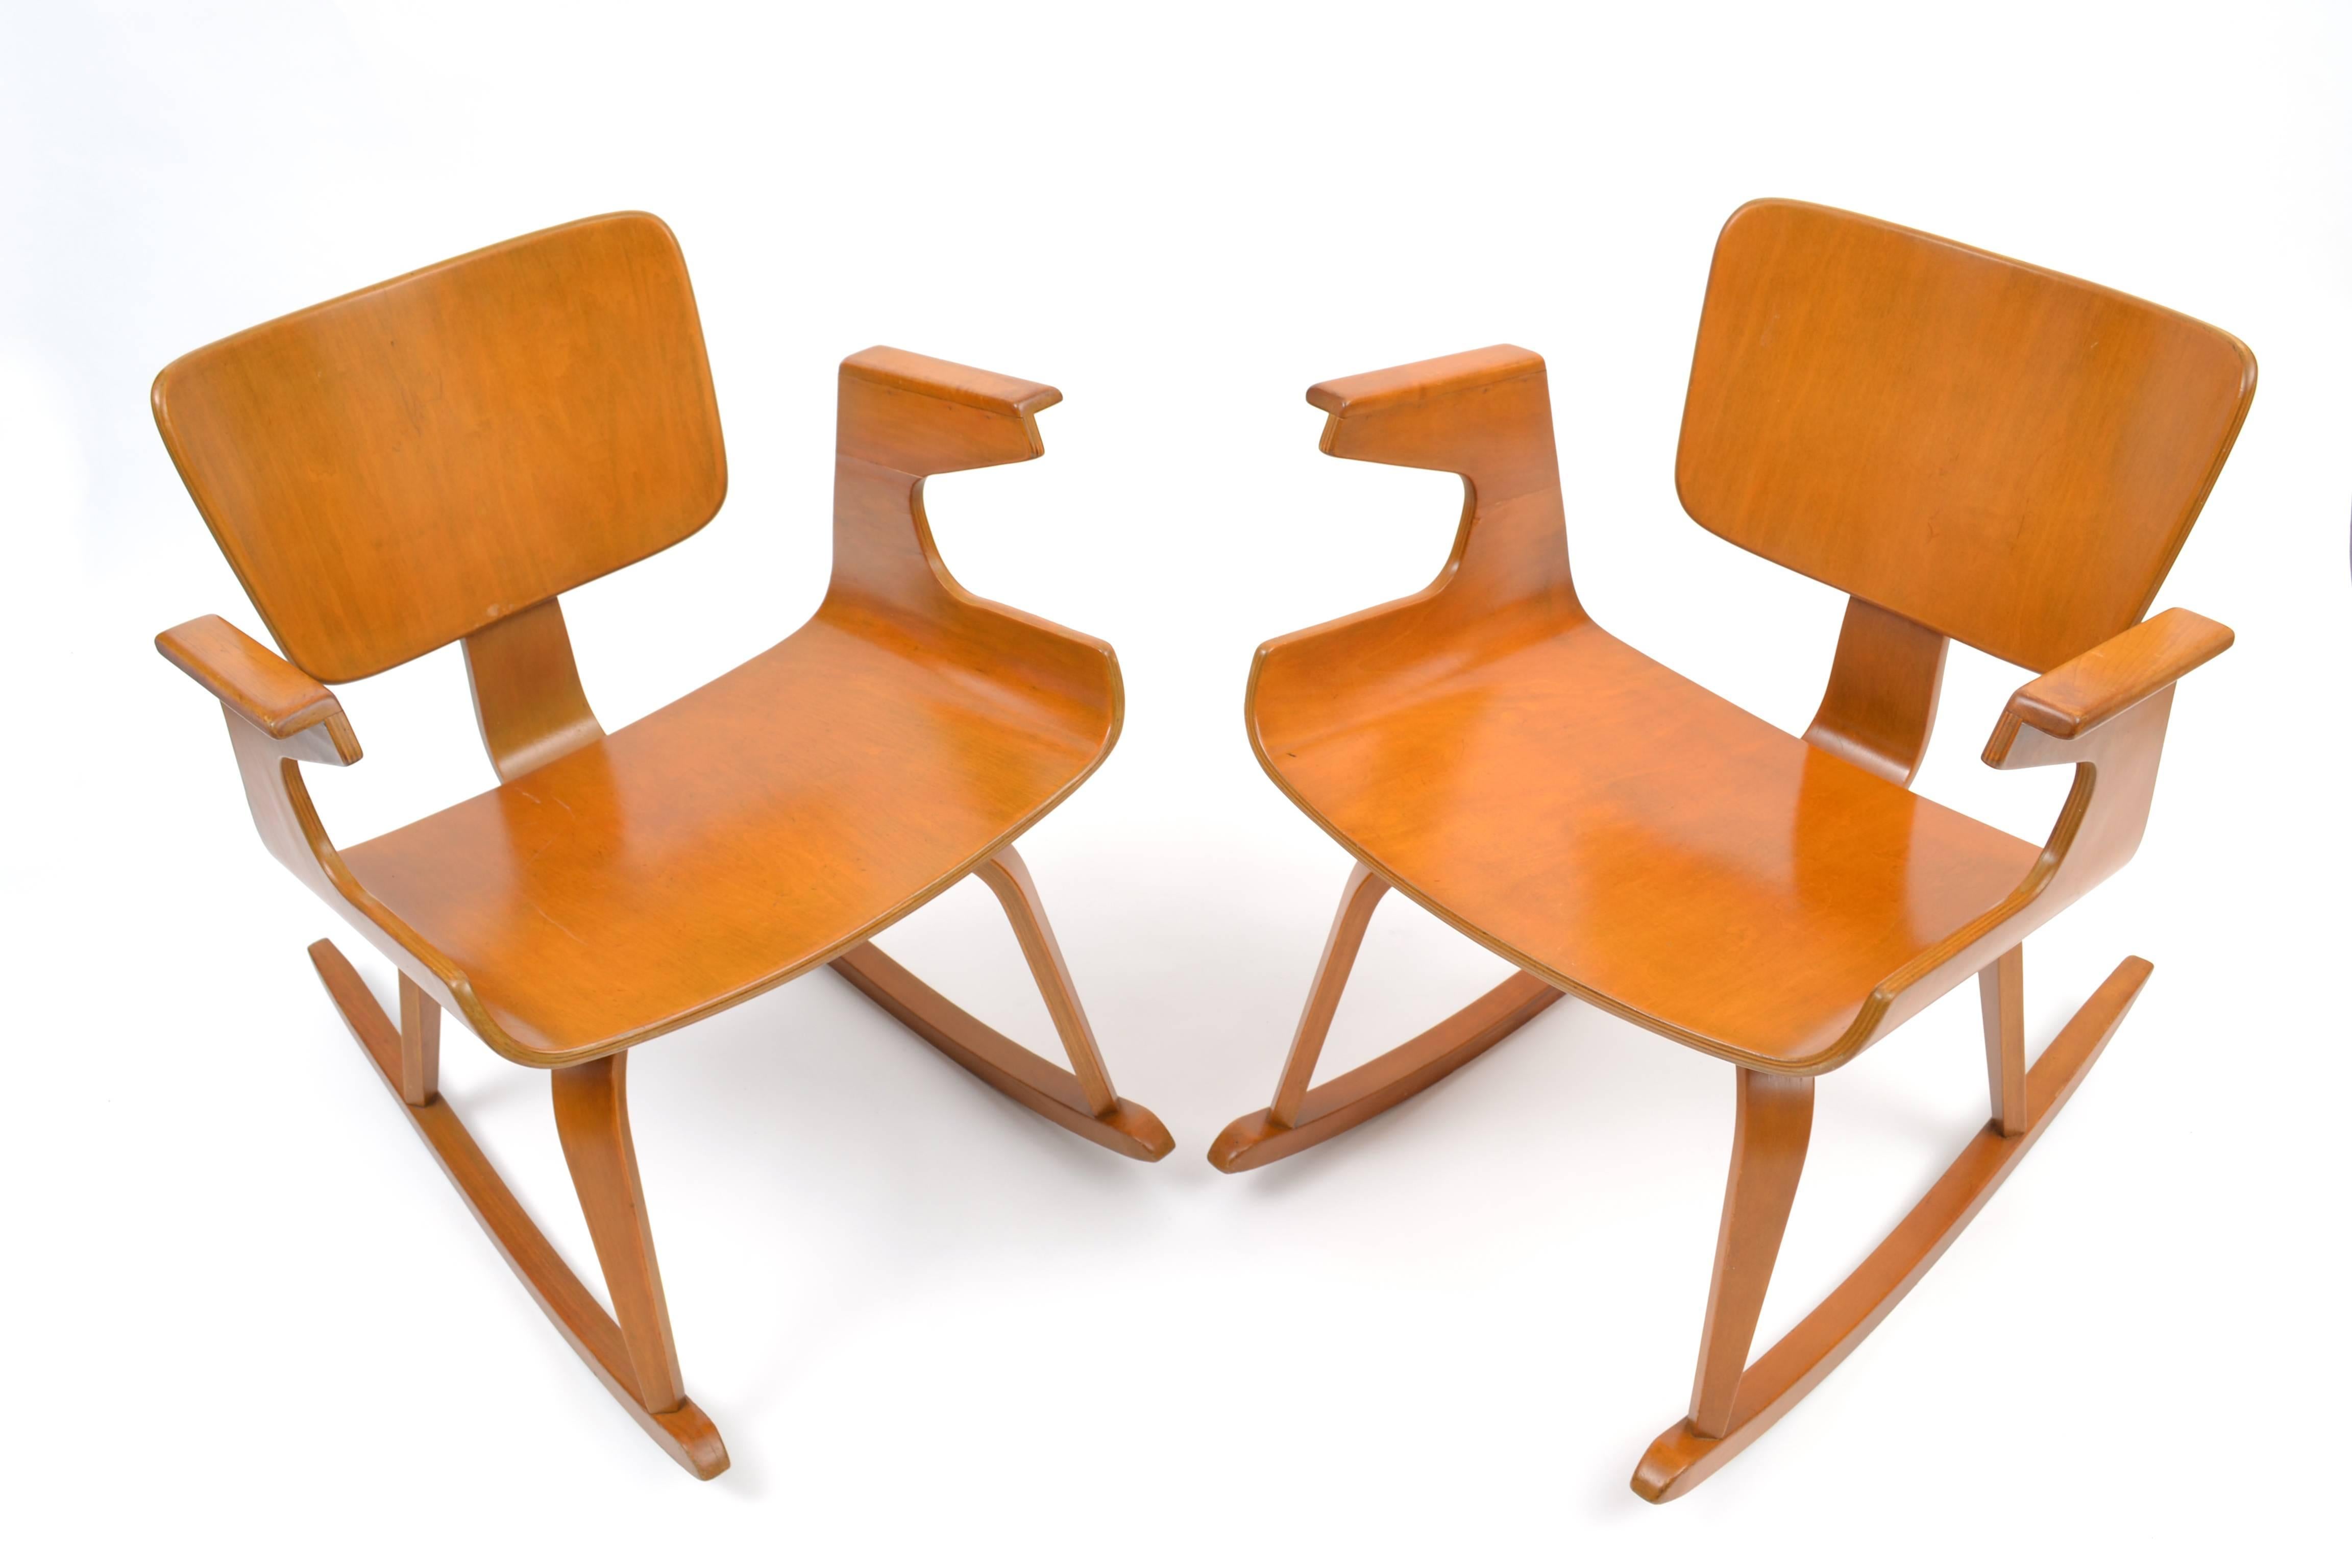 American Rare 1950s Thonet Plywood Rocking Chairs